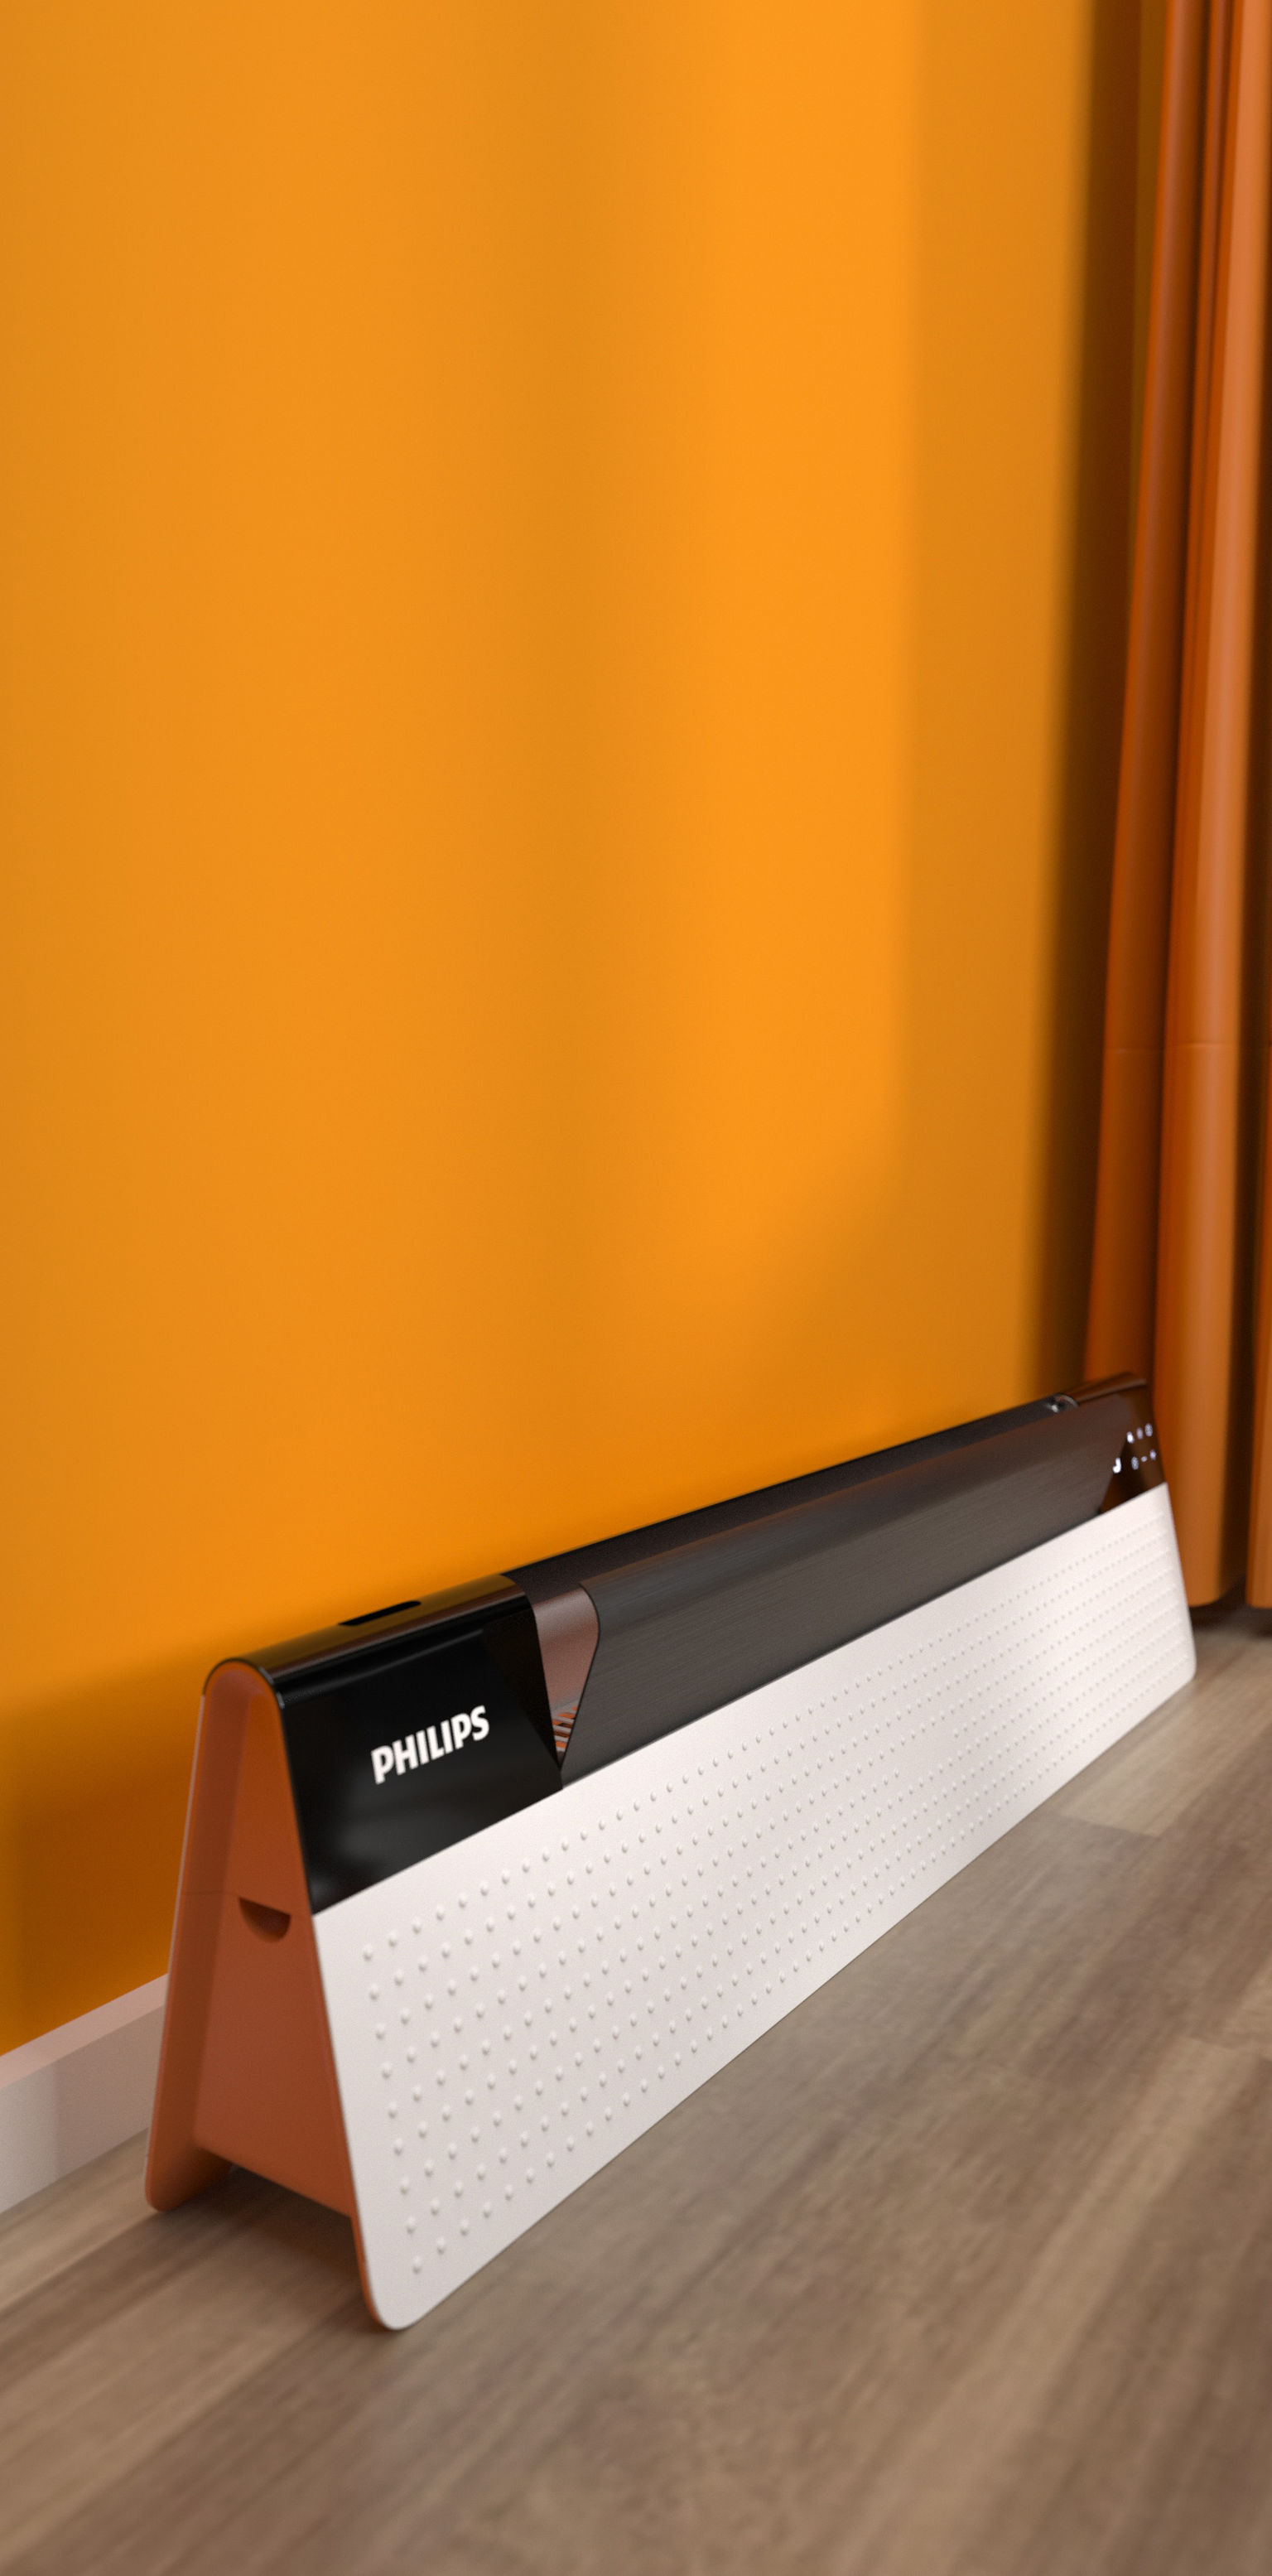 Philips Convection Heater